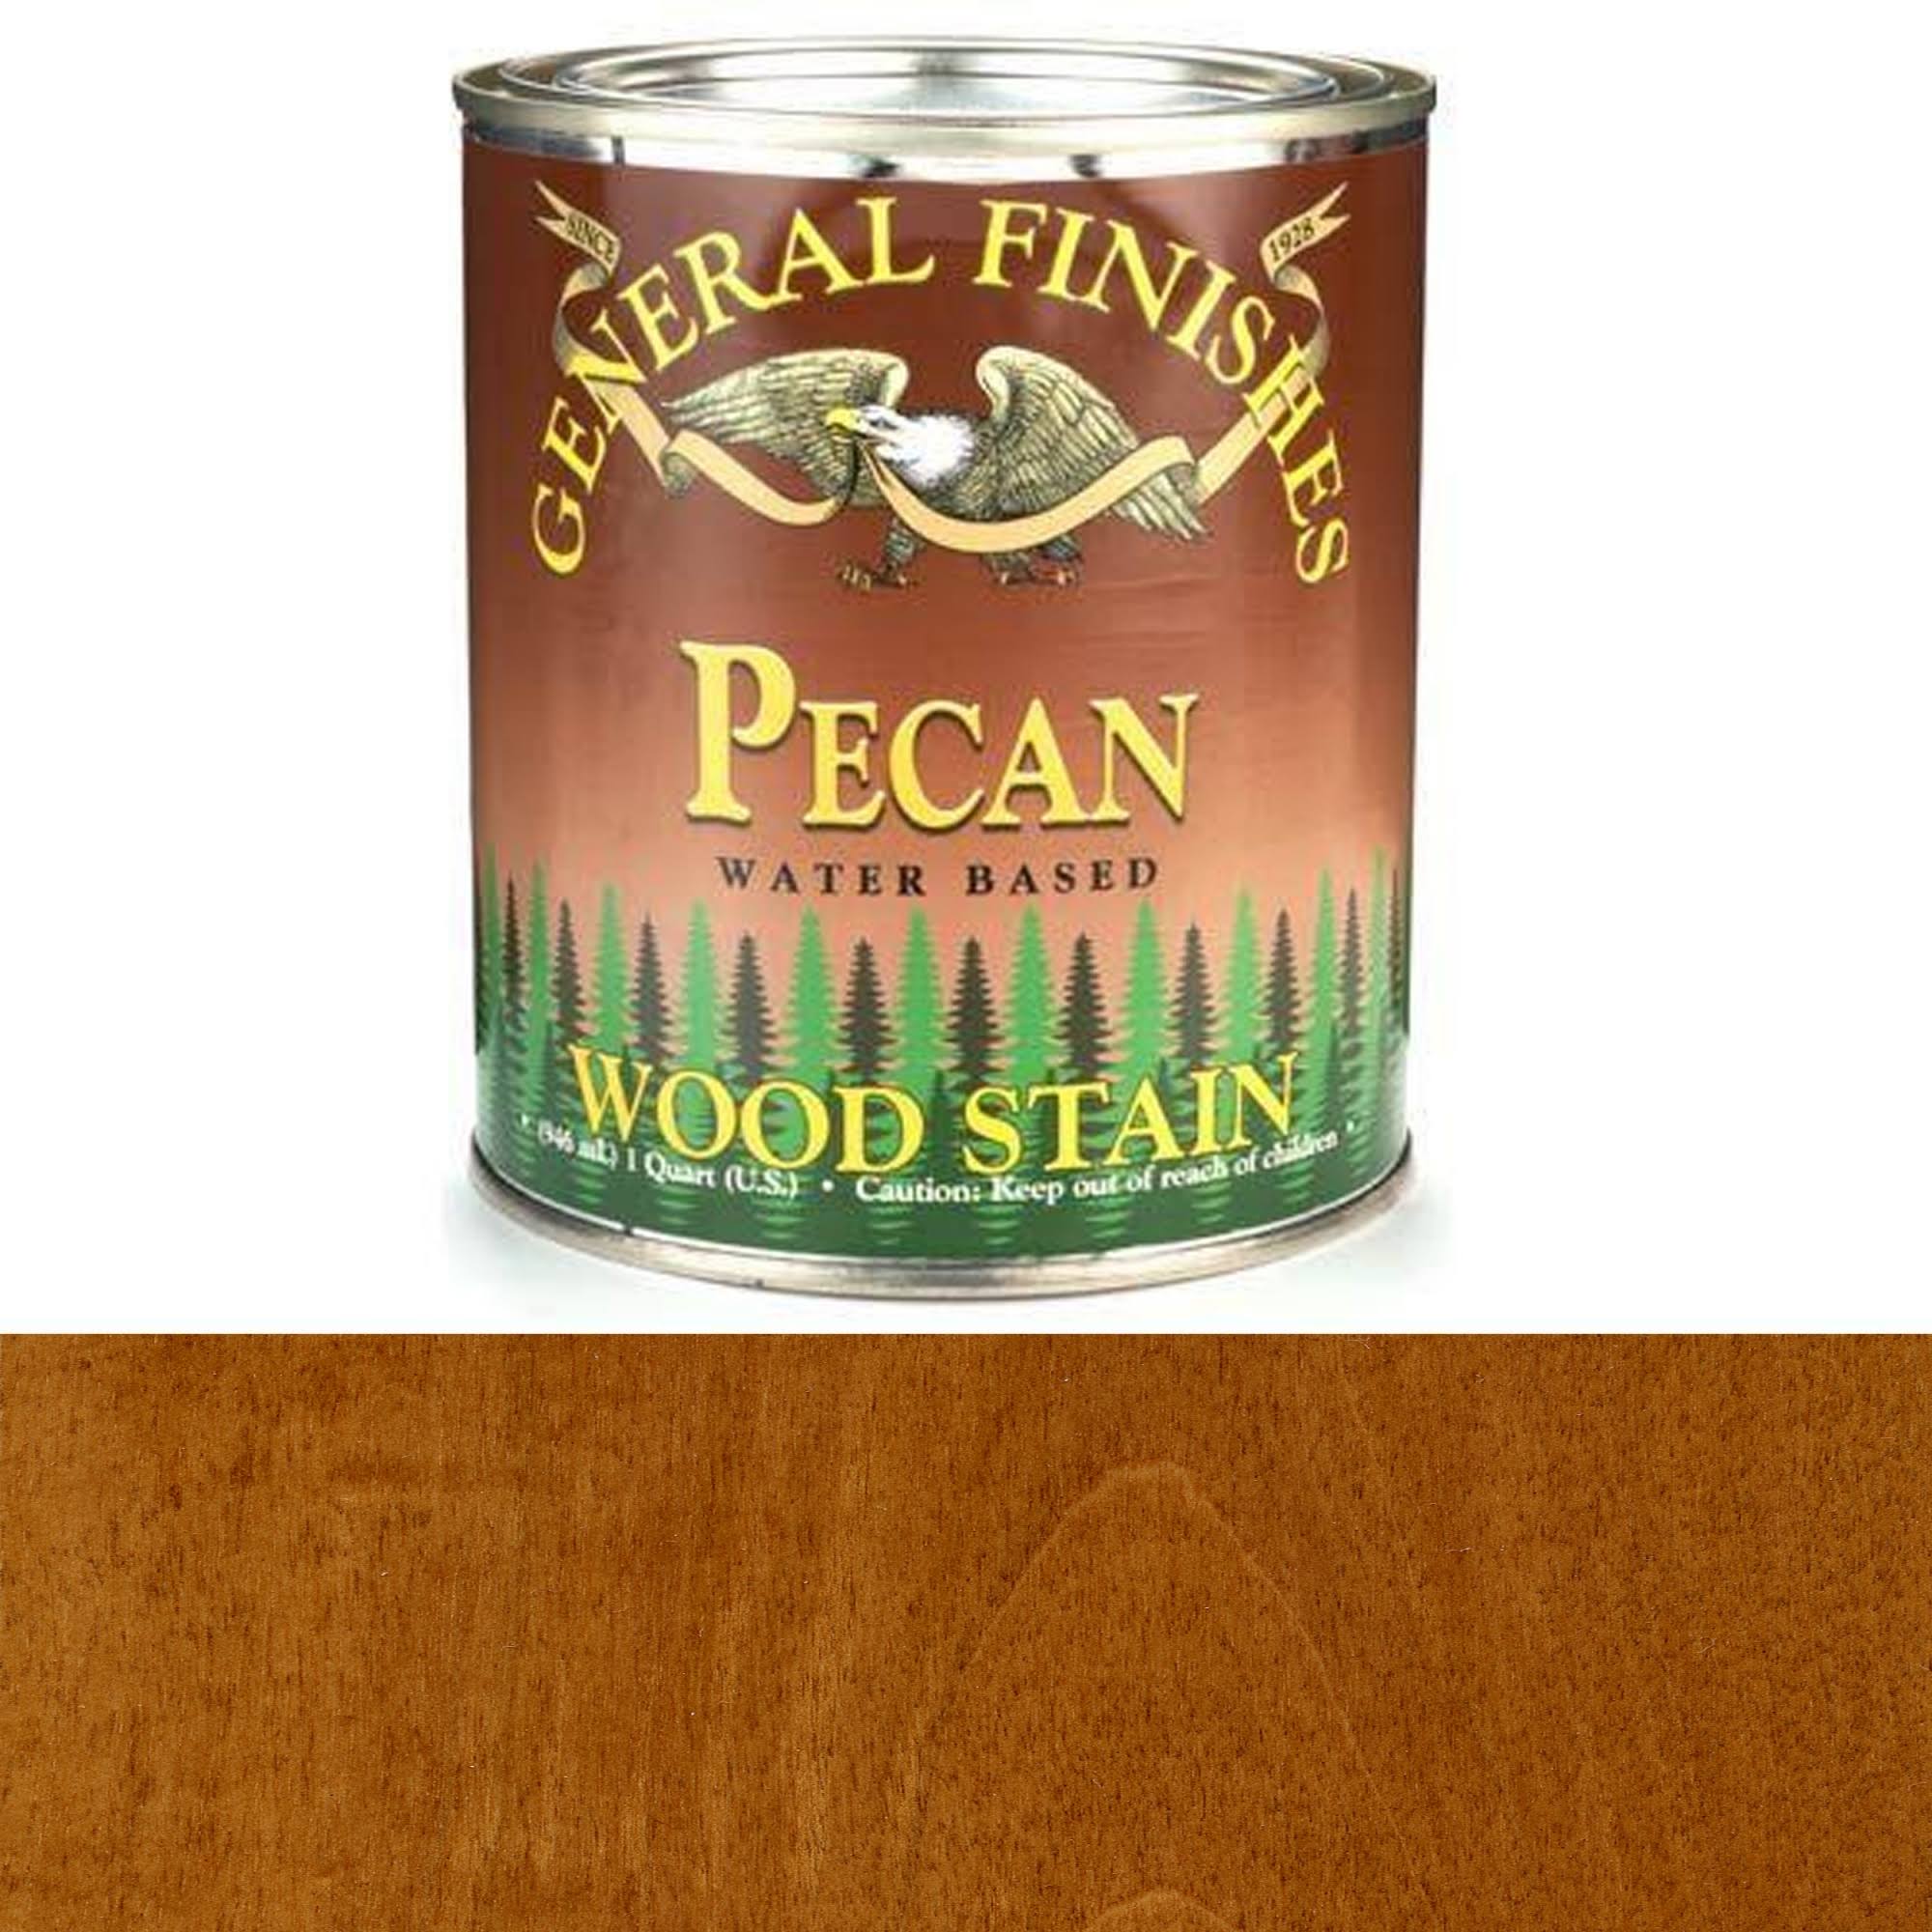 General Finishes WPQT Water Based Wood Stain - Pecan, 1qt